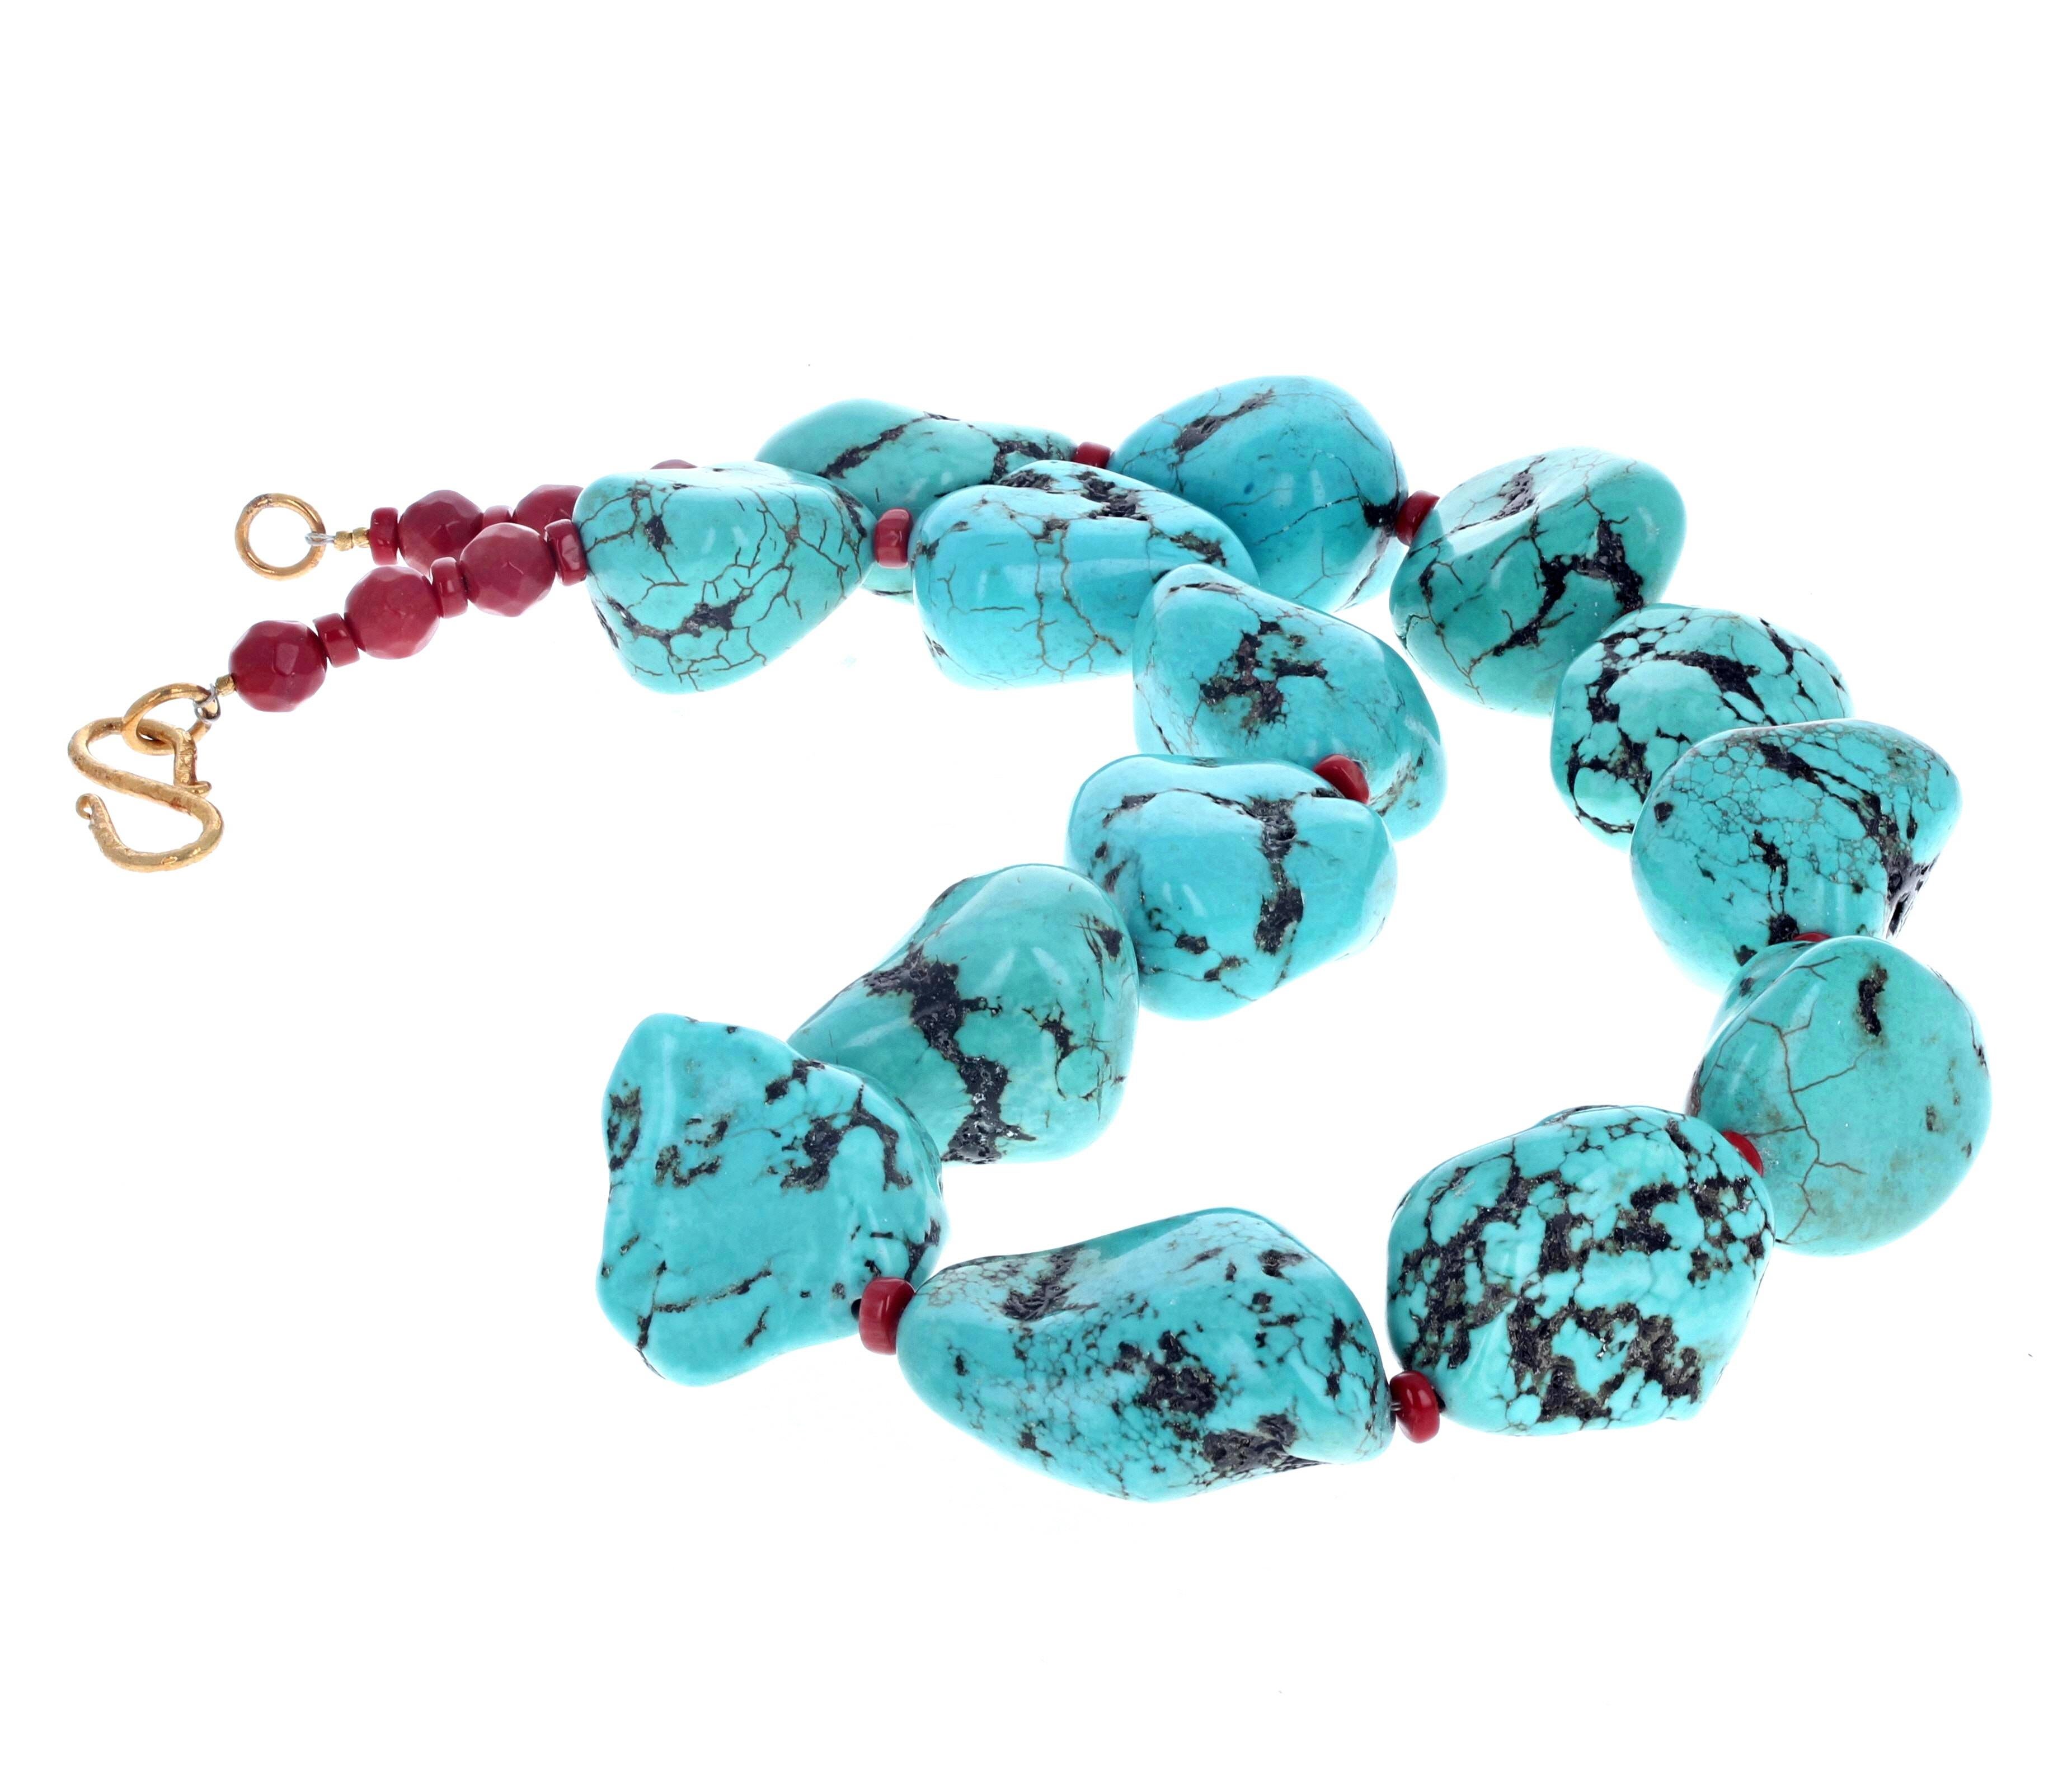 Taille mixte AJD Beautiful Polished Chunky Dramatic Real Turquoise & Red Coral Necklace en vente